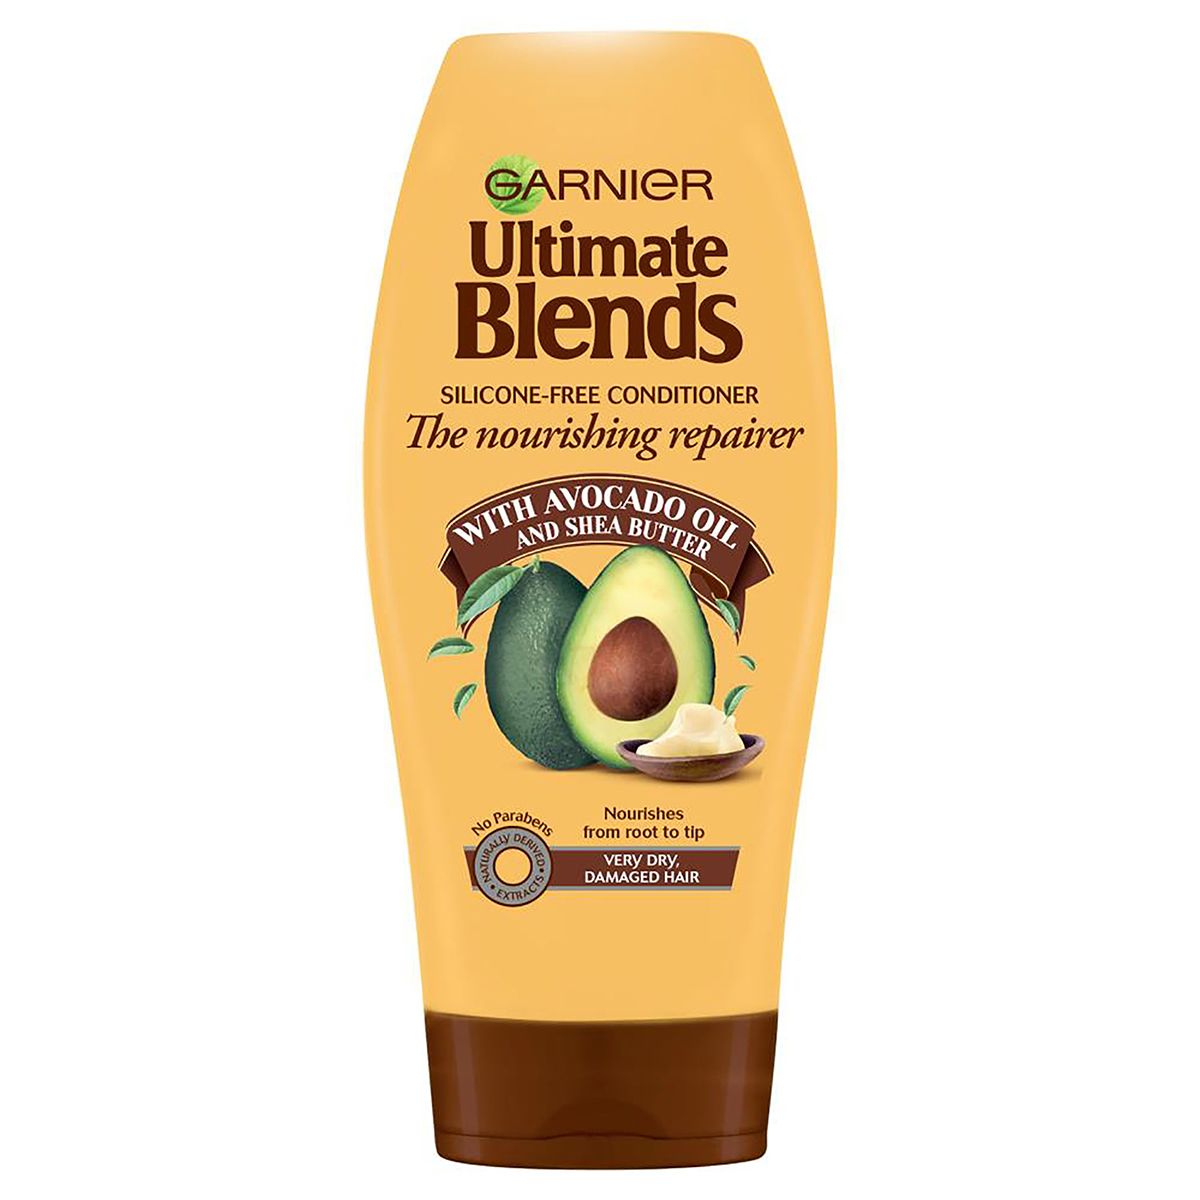 Garnier Ultimate Blends - Avocado Oil and Shea Butter Conditioner 360ml |  Buy Online in South Africa 